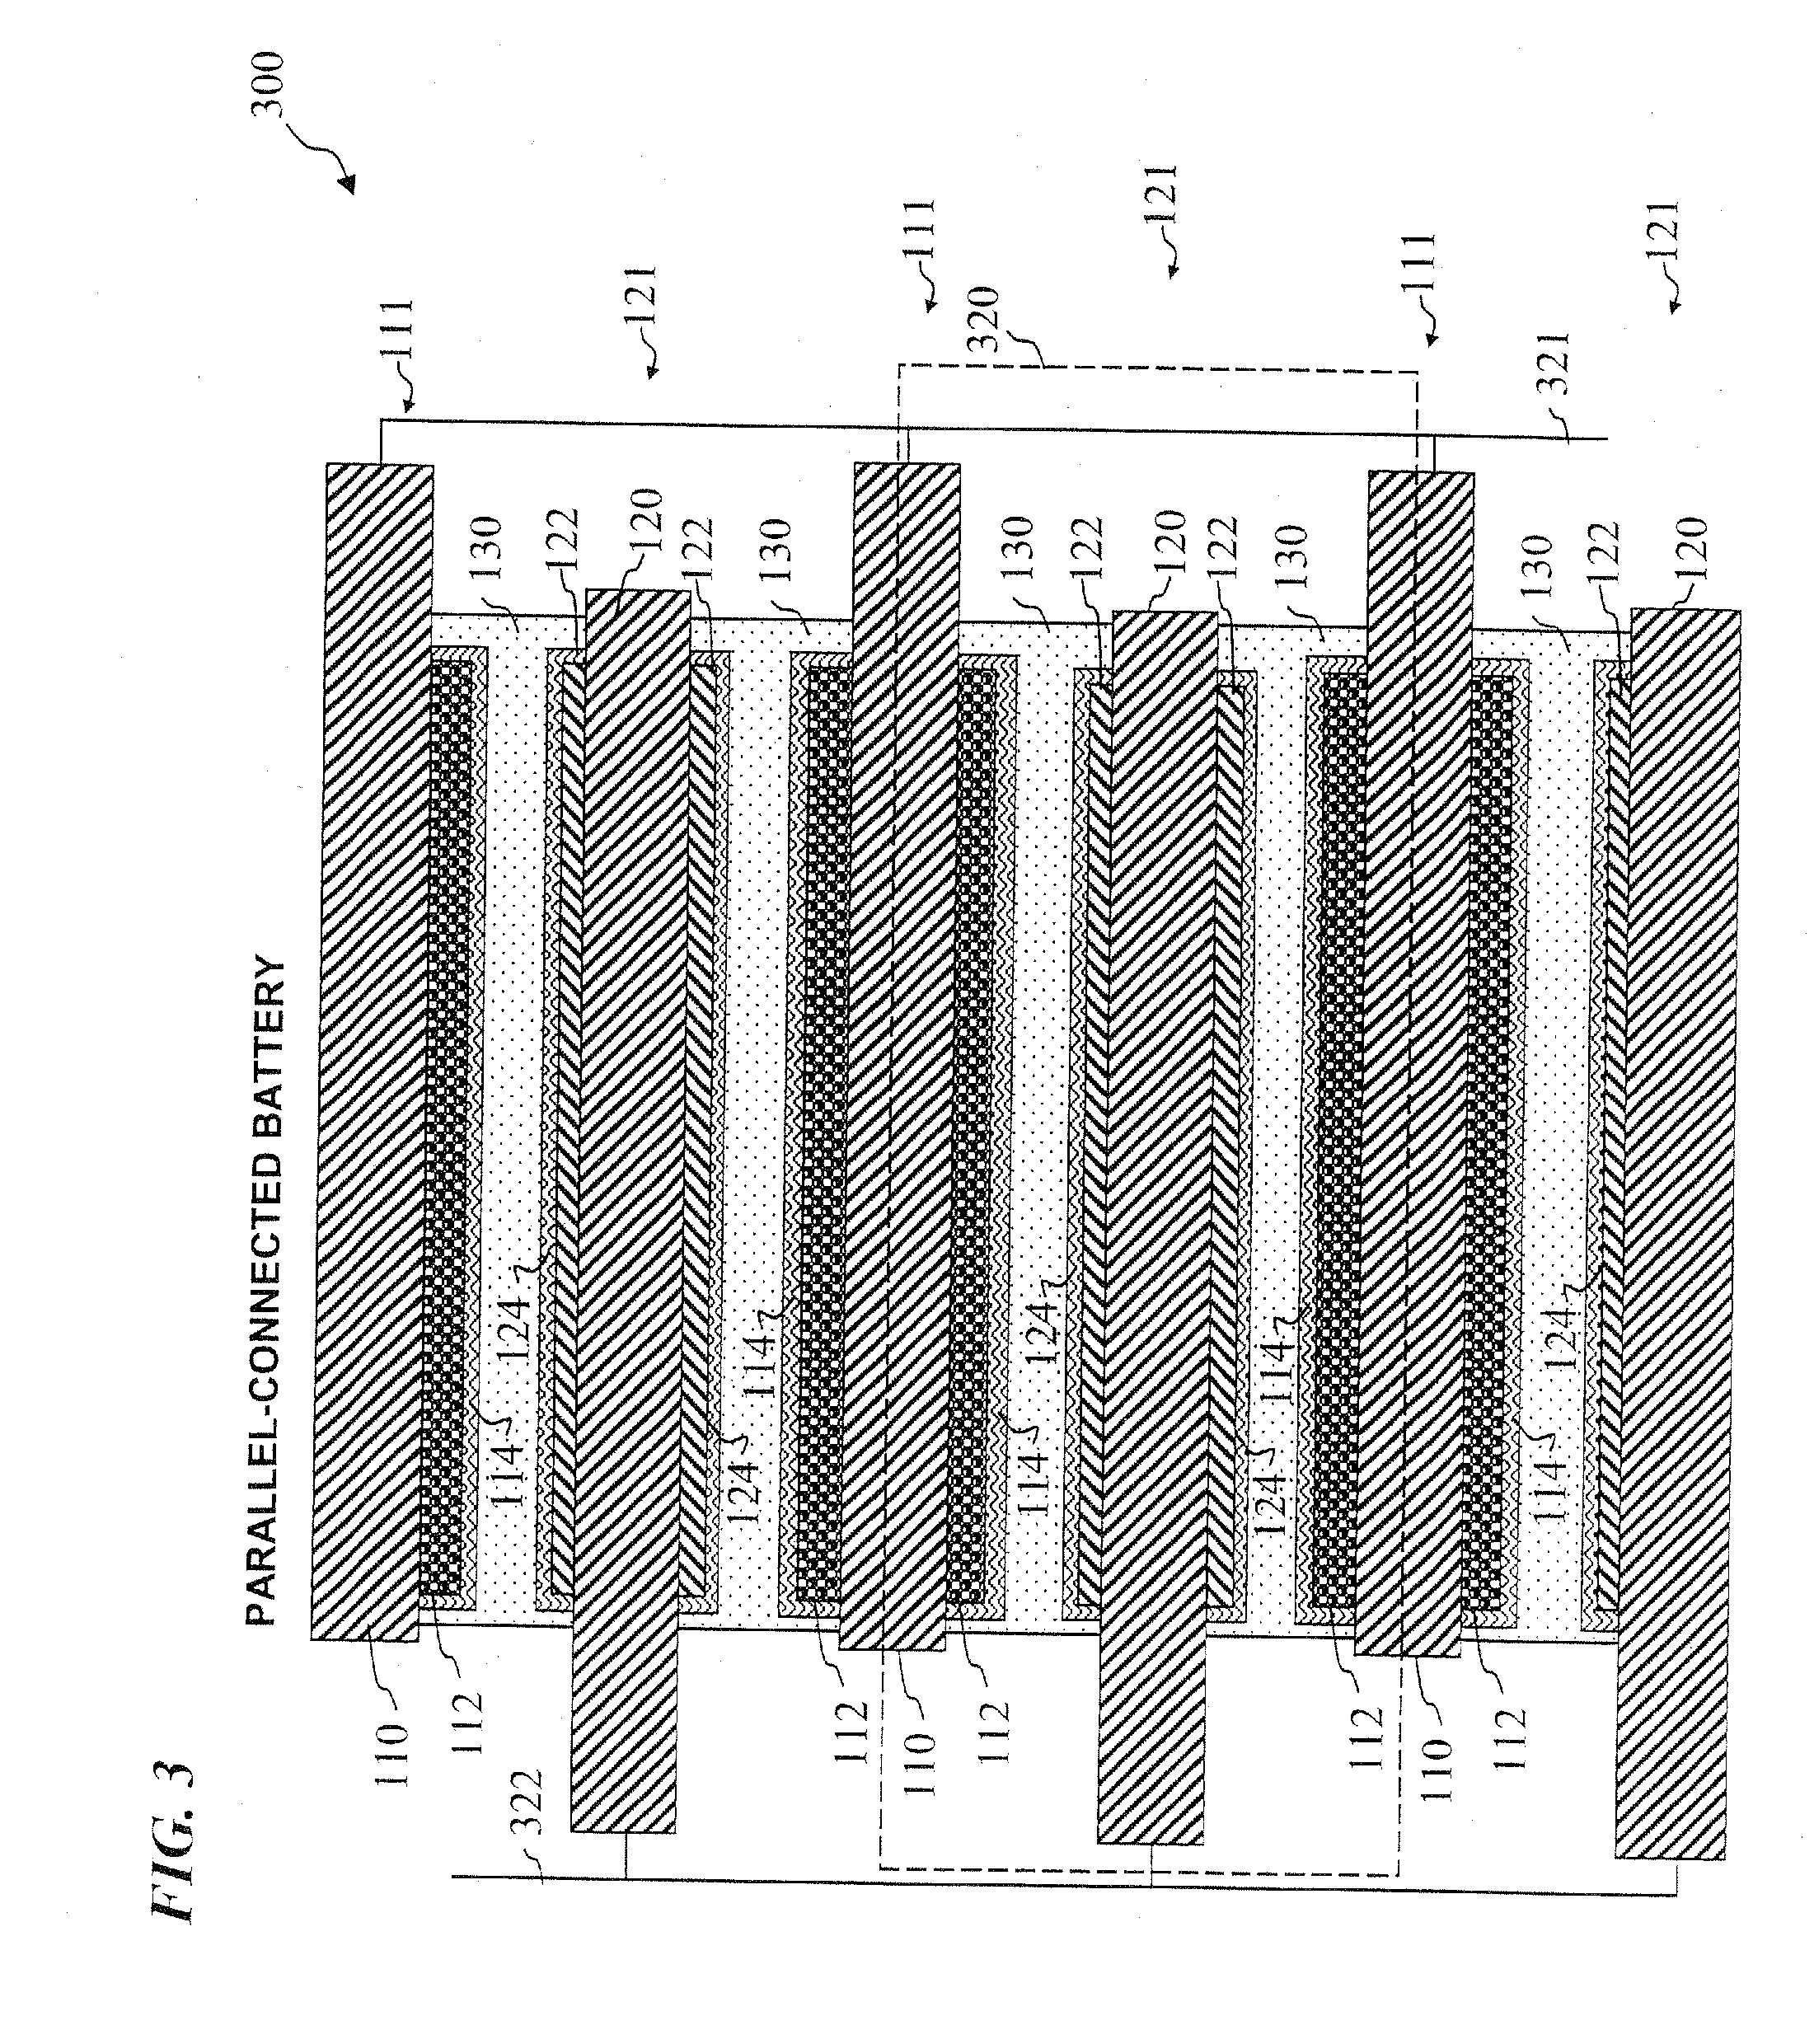 THIN-FILM BATTERIES WITH POLYMER AND LiPON ELECTROLYTE LAYERS AND METHOD